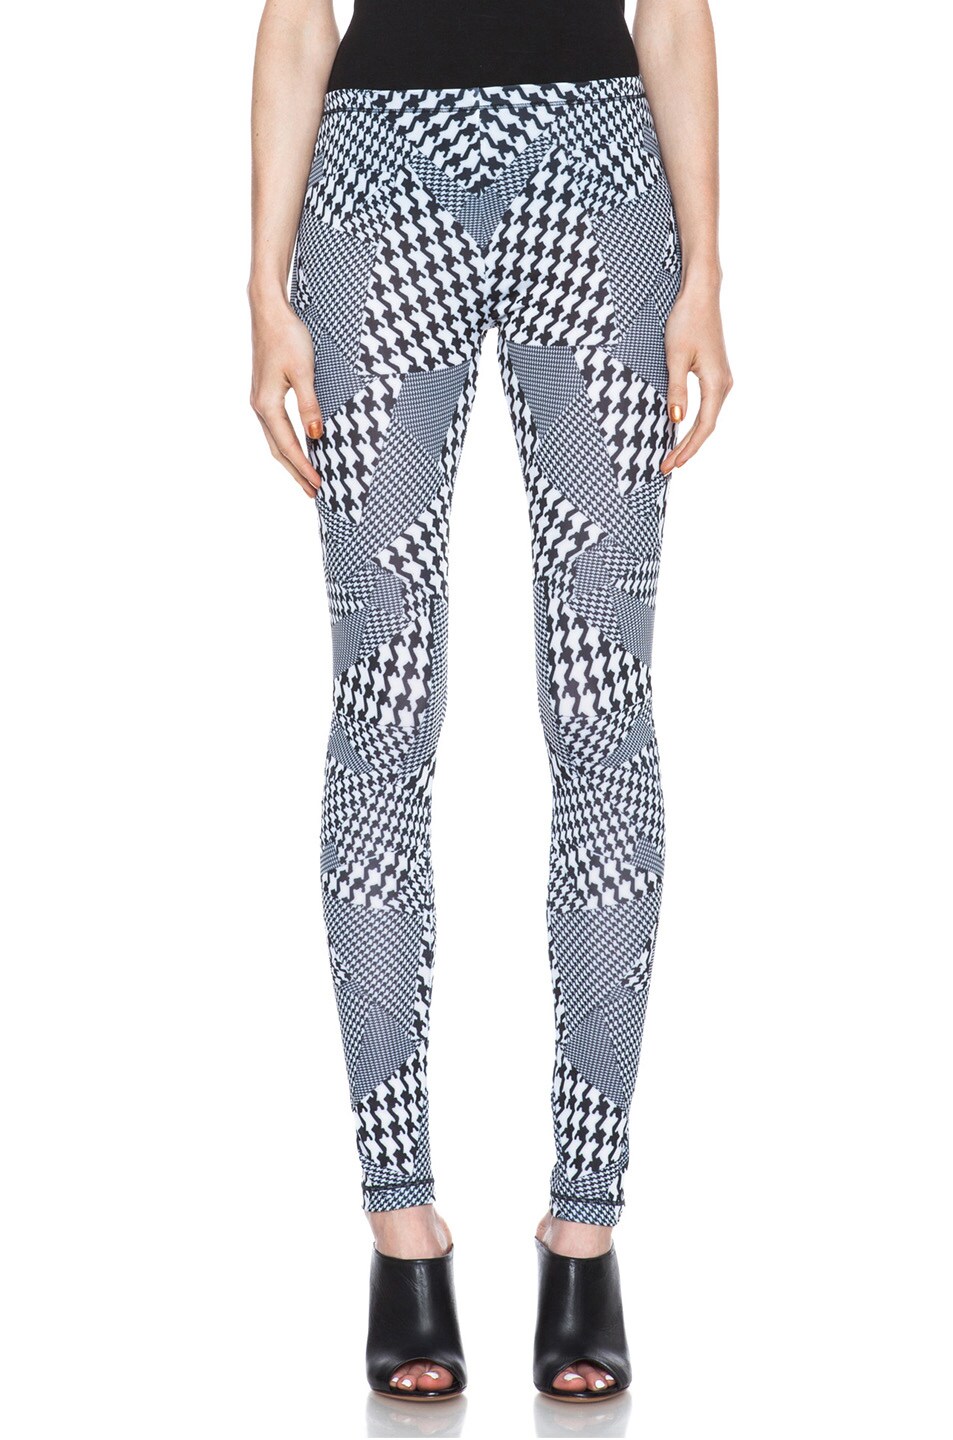 Image 1 of McQ Alexander McQueen Printed Poly-Blend Legging in Black & Whire